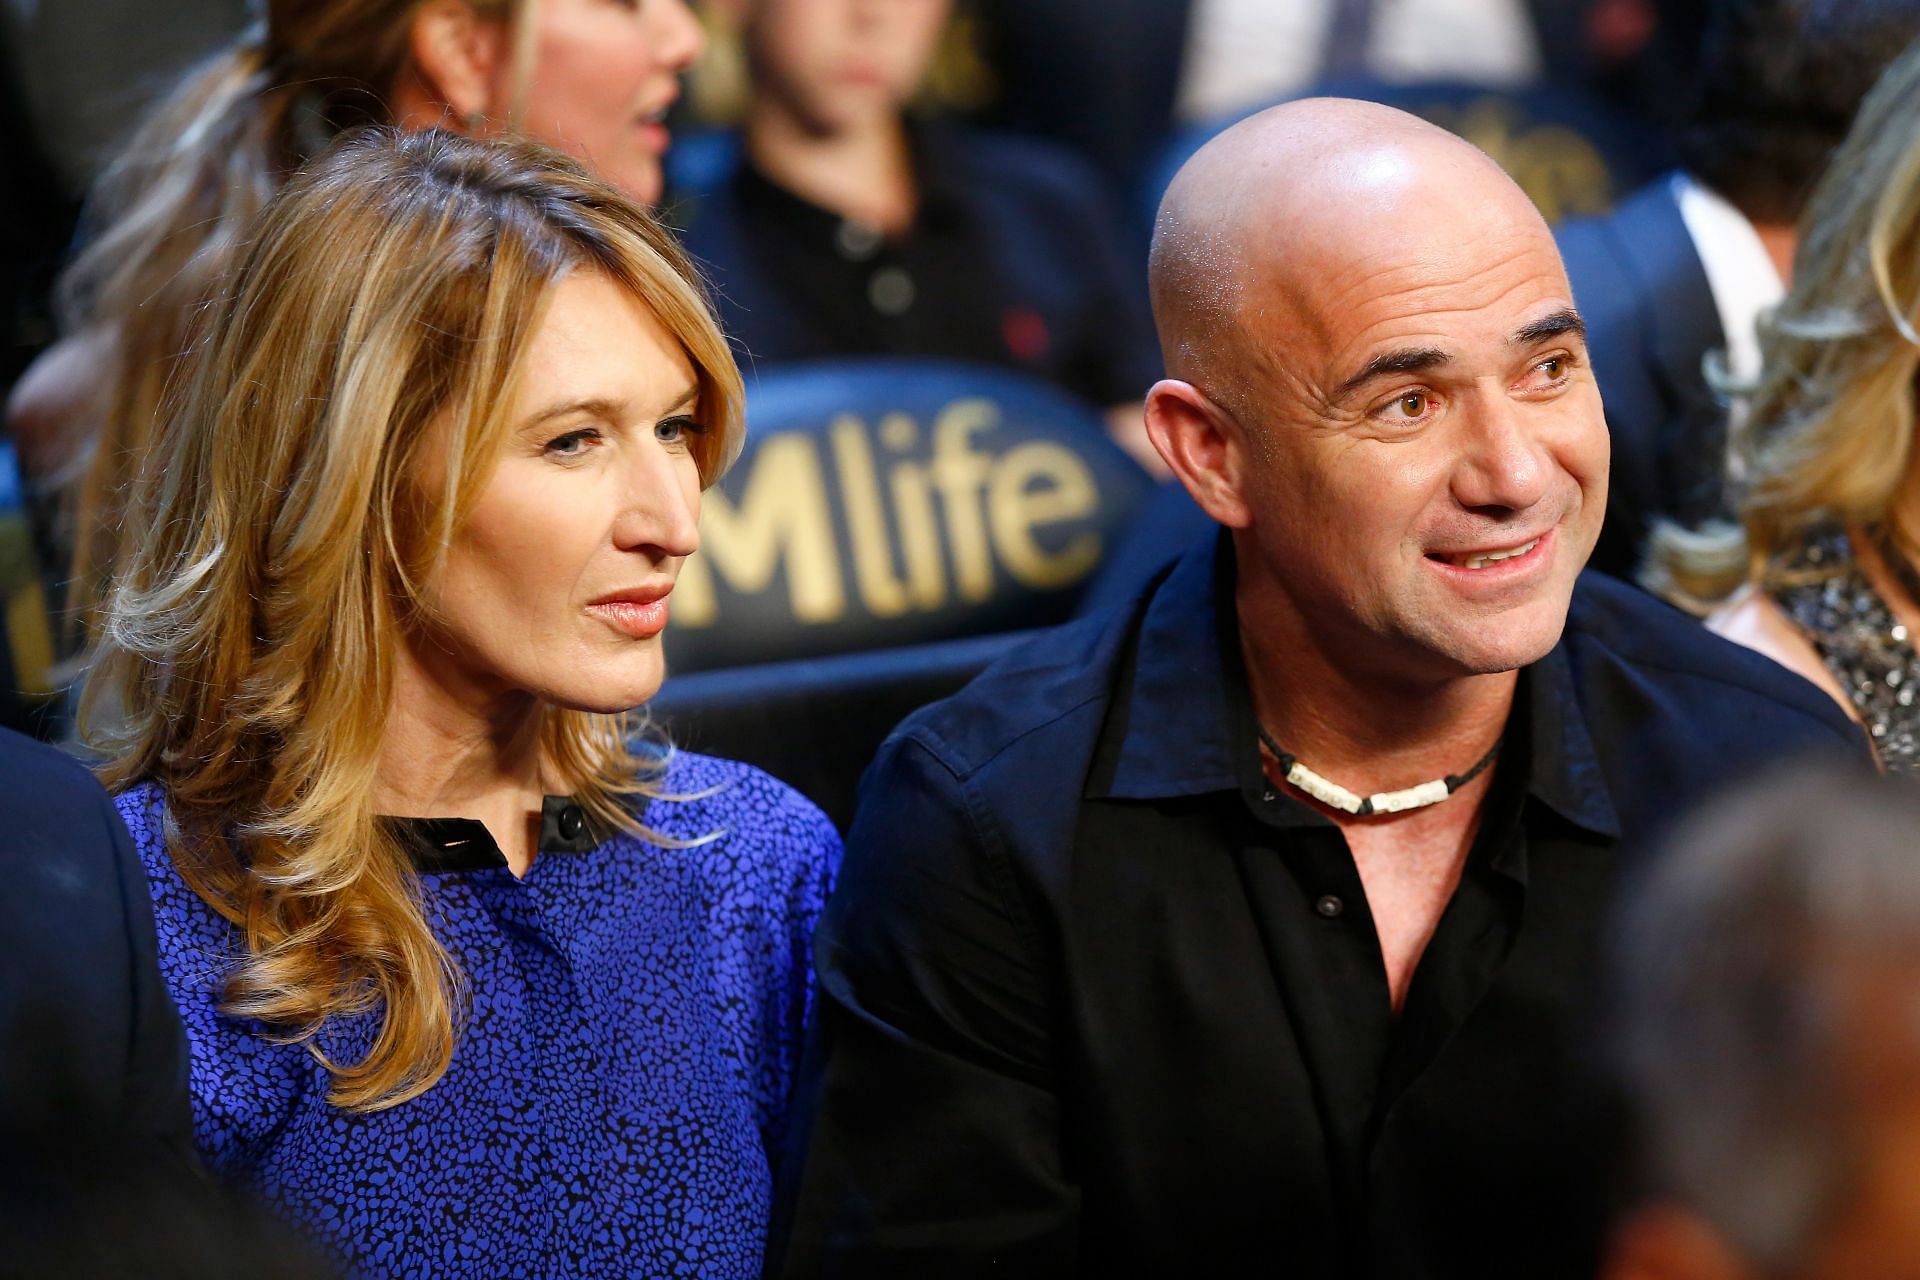 Andre Agassi and Steffi Graf pictured in 2015